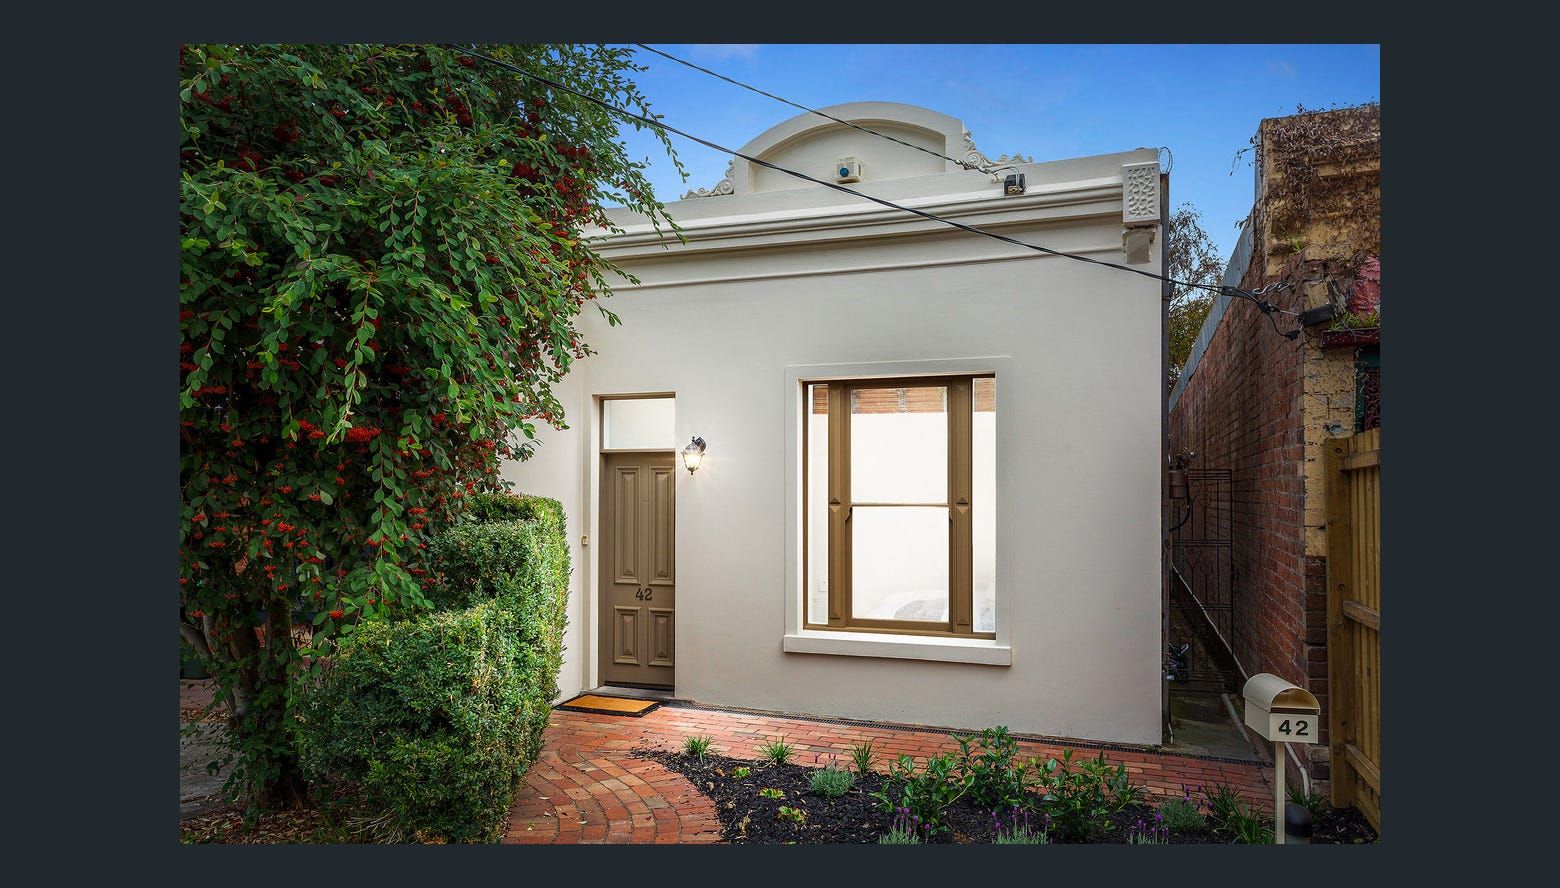 3 bedrooms House in 42 Bell Street HAWTHORN VIC, 3122